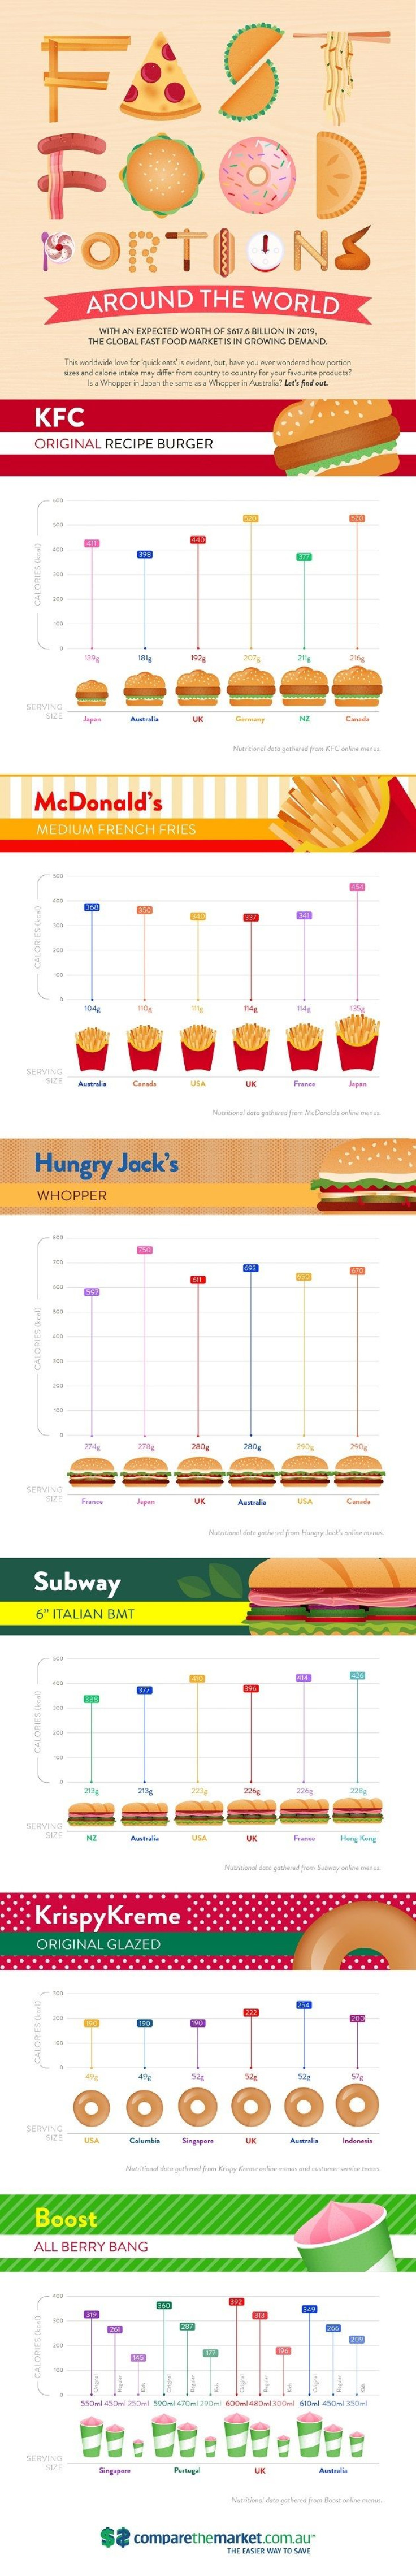 Compare the Market's table of portion and calories of popular fast food items around the world.